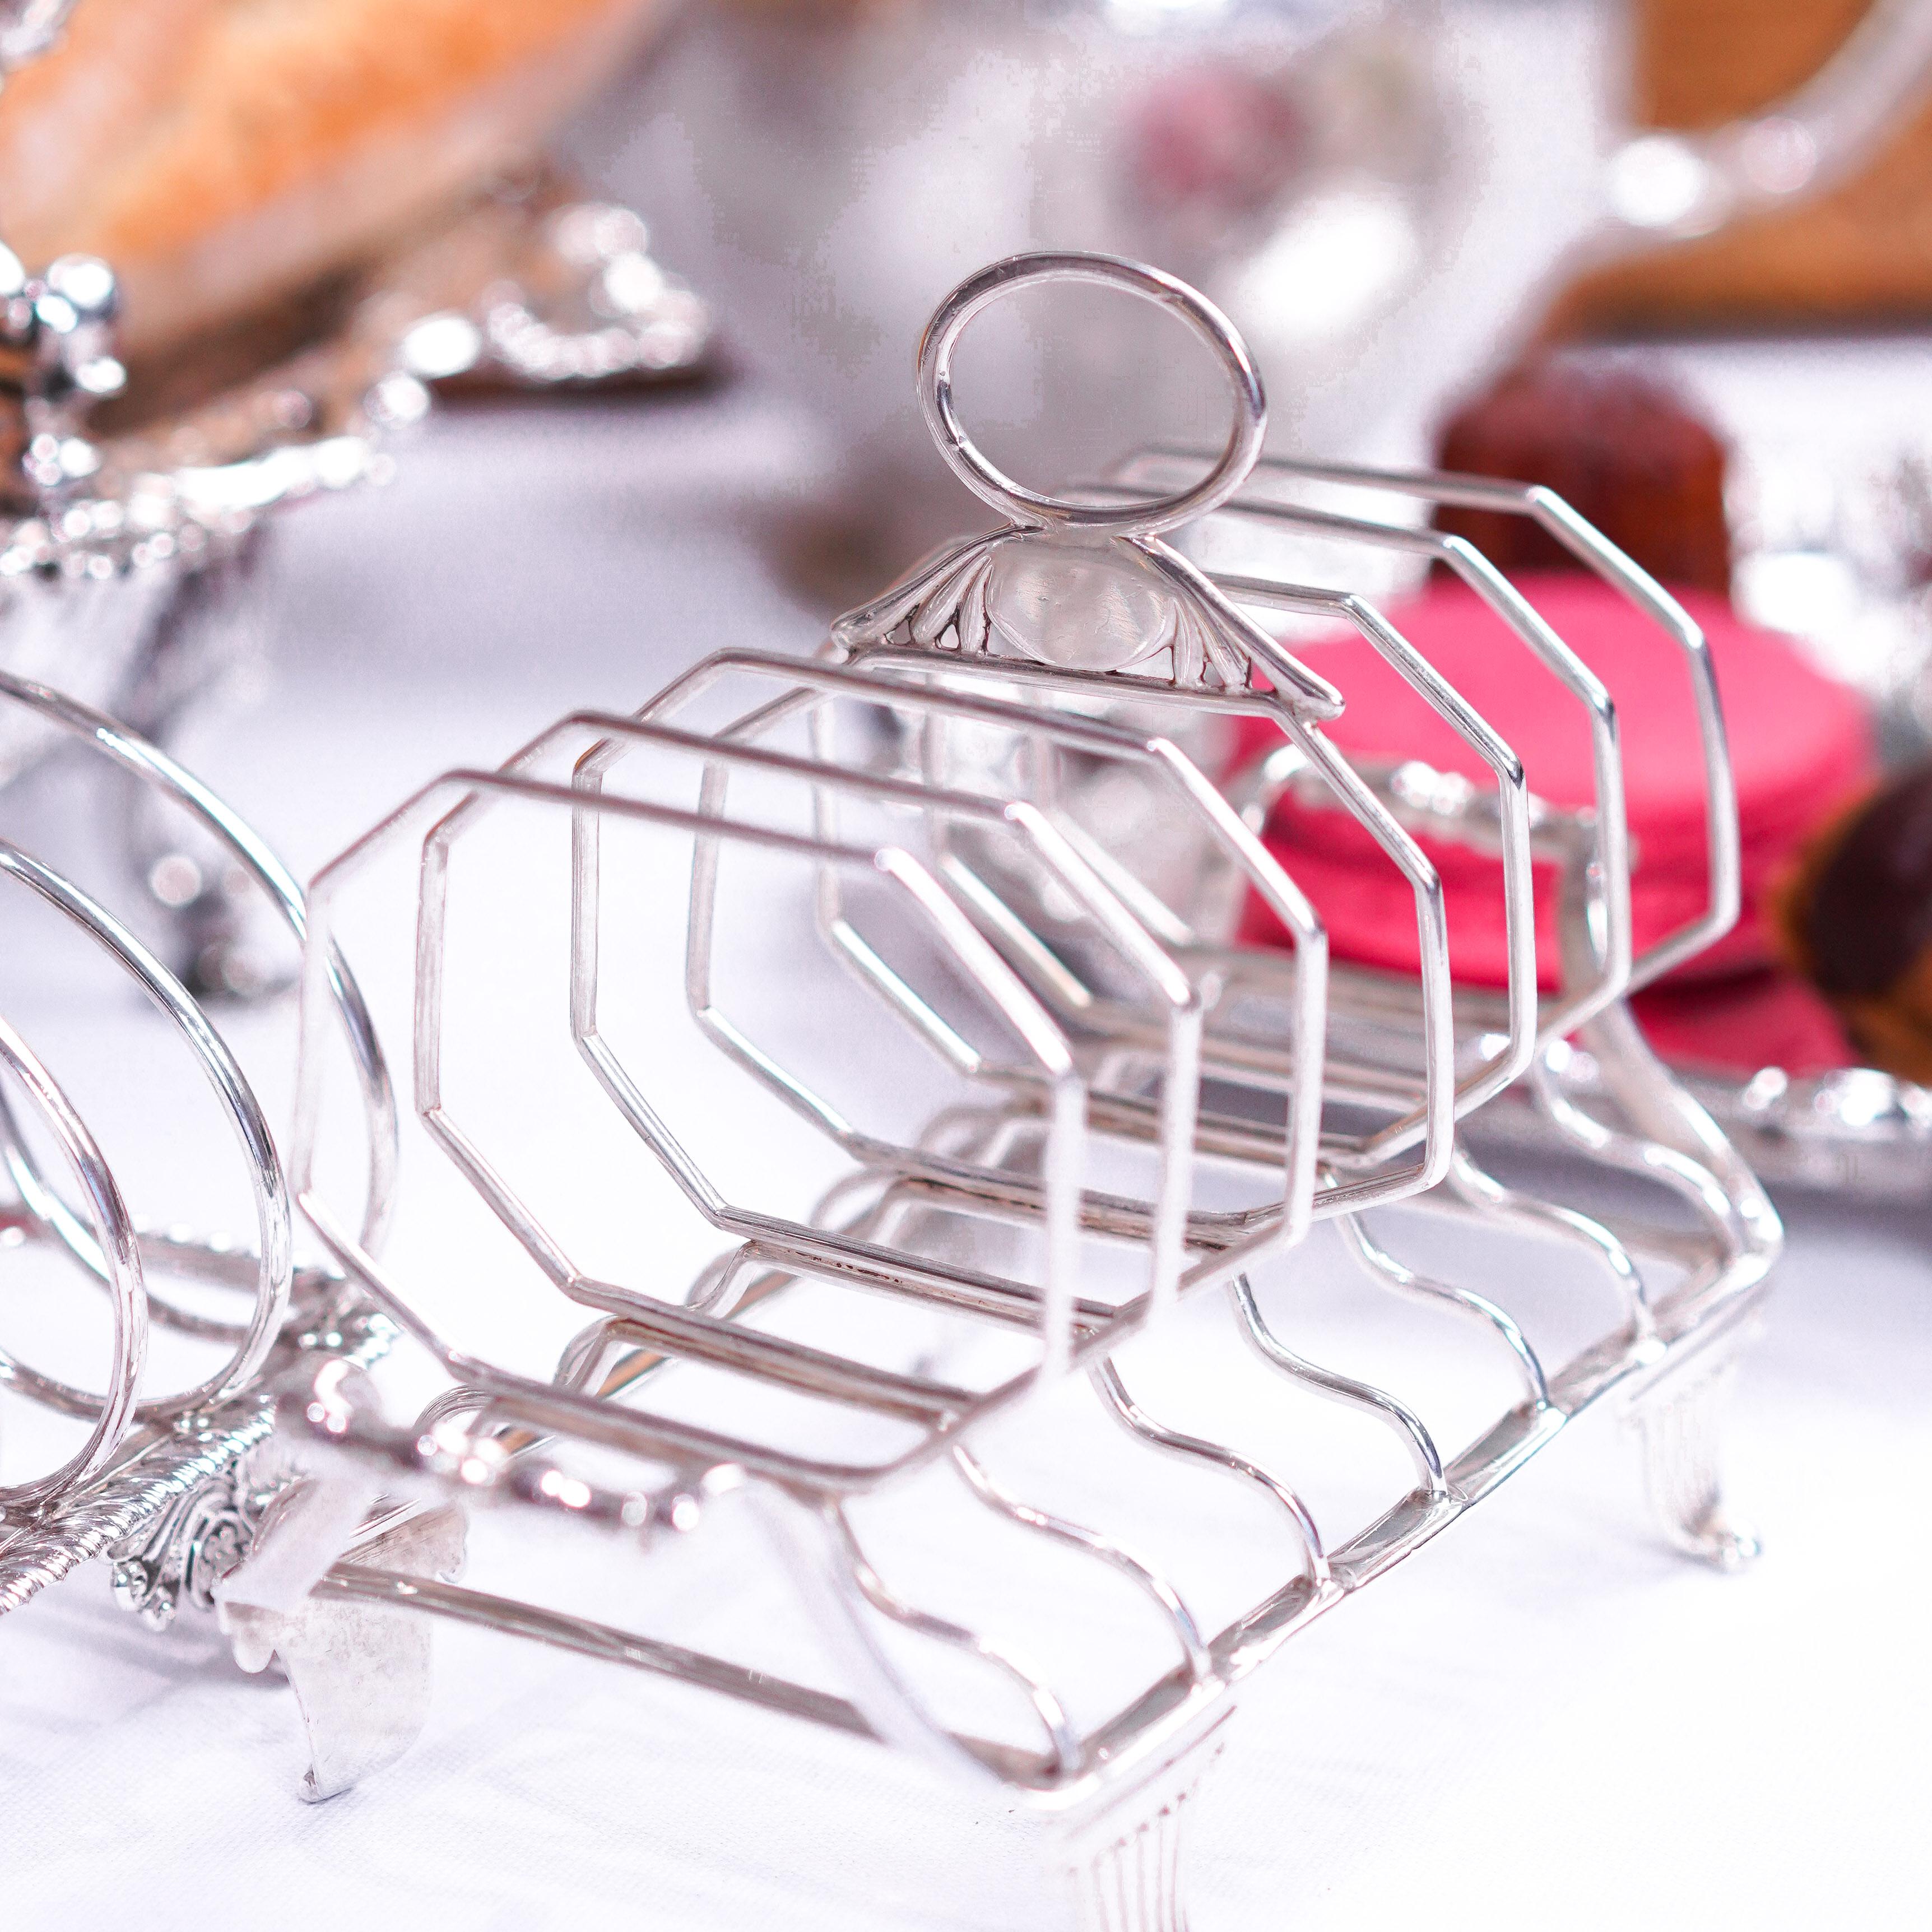 We are delighted to offer this splendid and stylistically juxtaposing Georgian solid silver toast rack made in London 1809 with marks of Rebecca Emes & Edward Barnard.
 
At first glance, even to the seasoned collector, this rack may appear